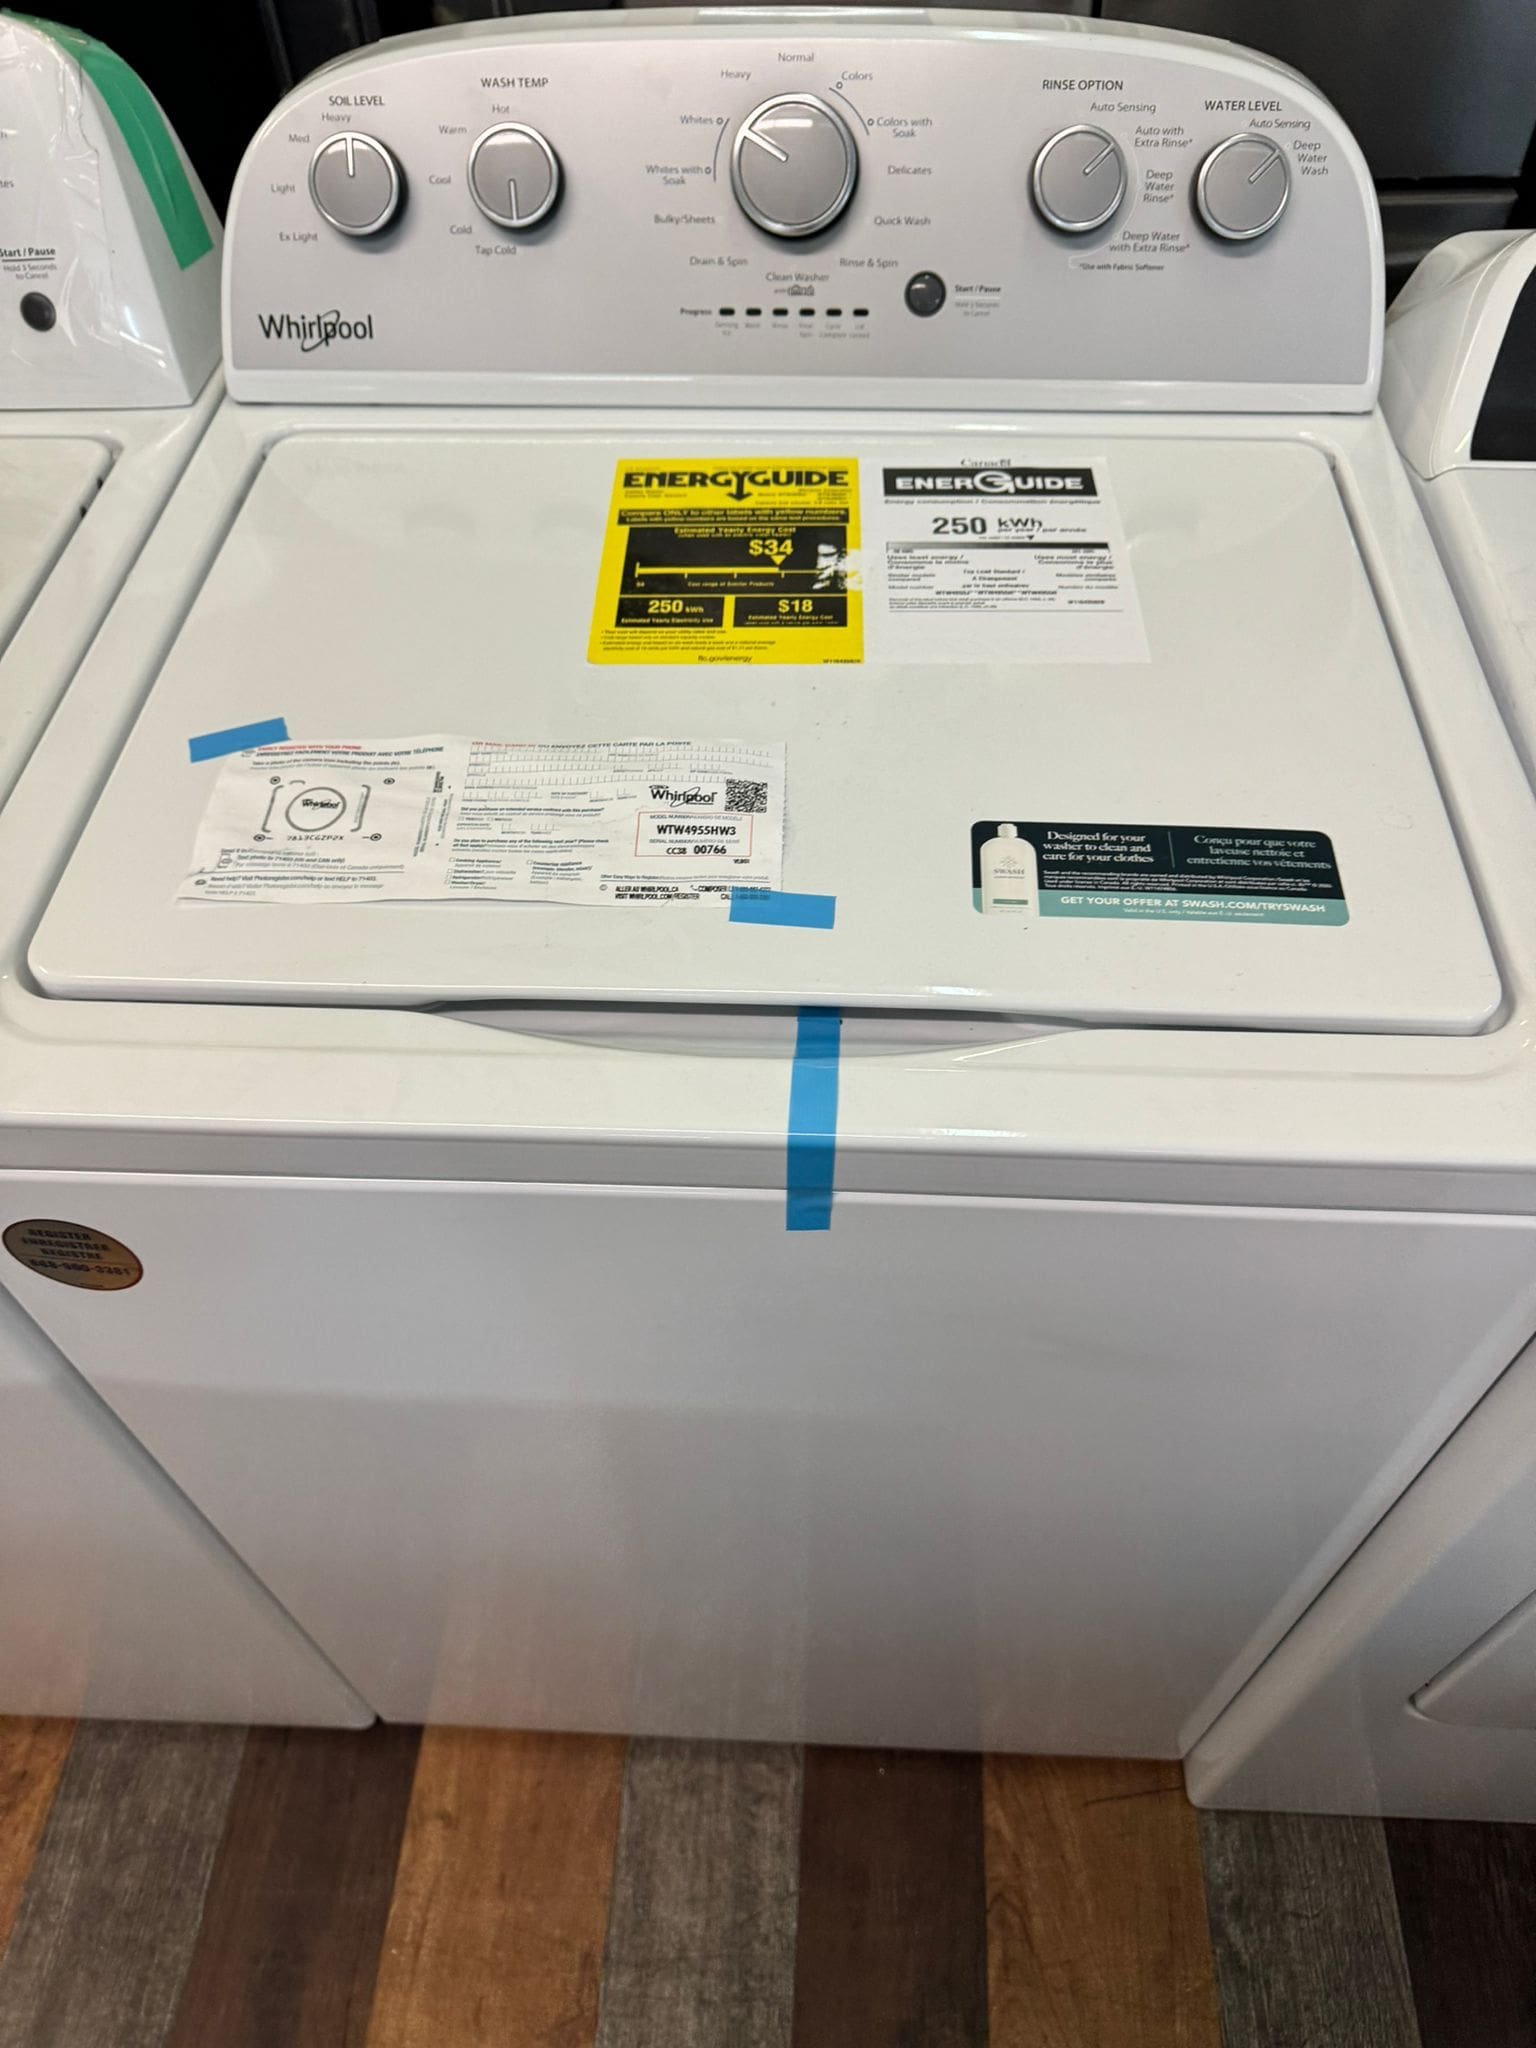 Whirlpool New 3.8 cu. ft. Top Load Washer – White